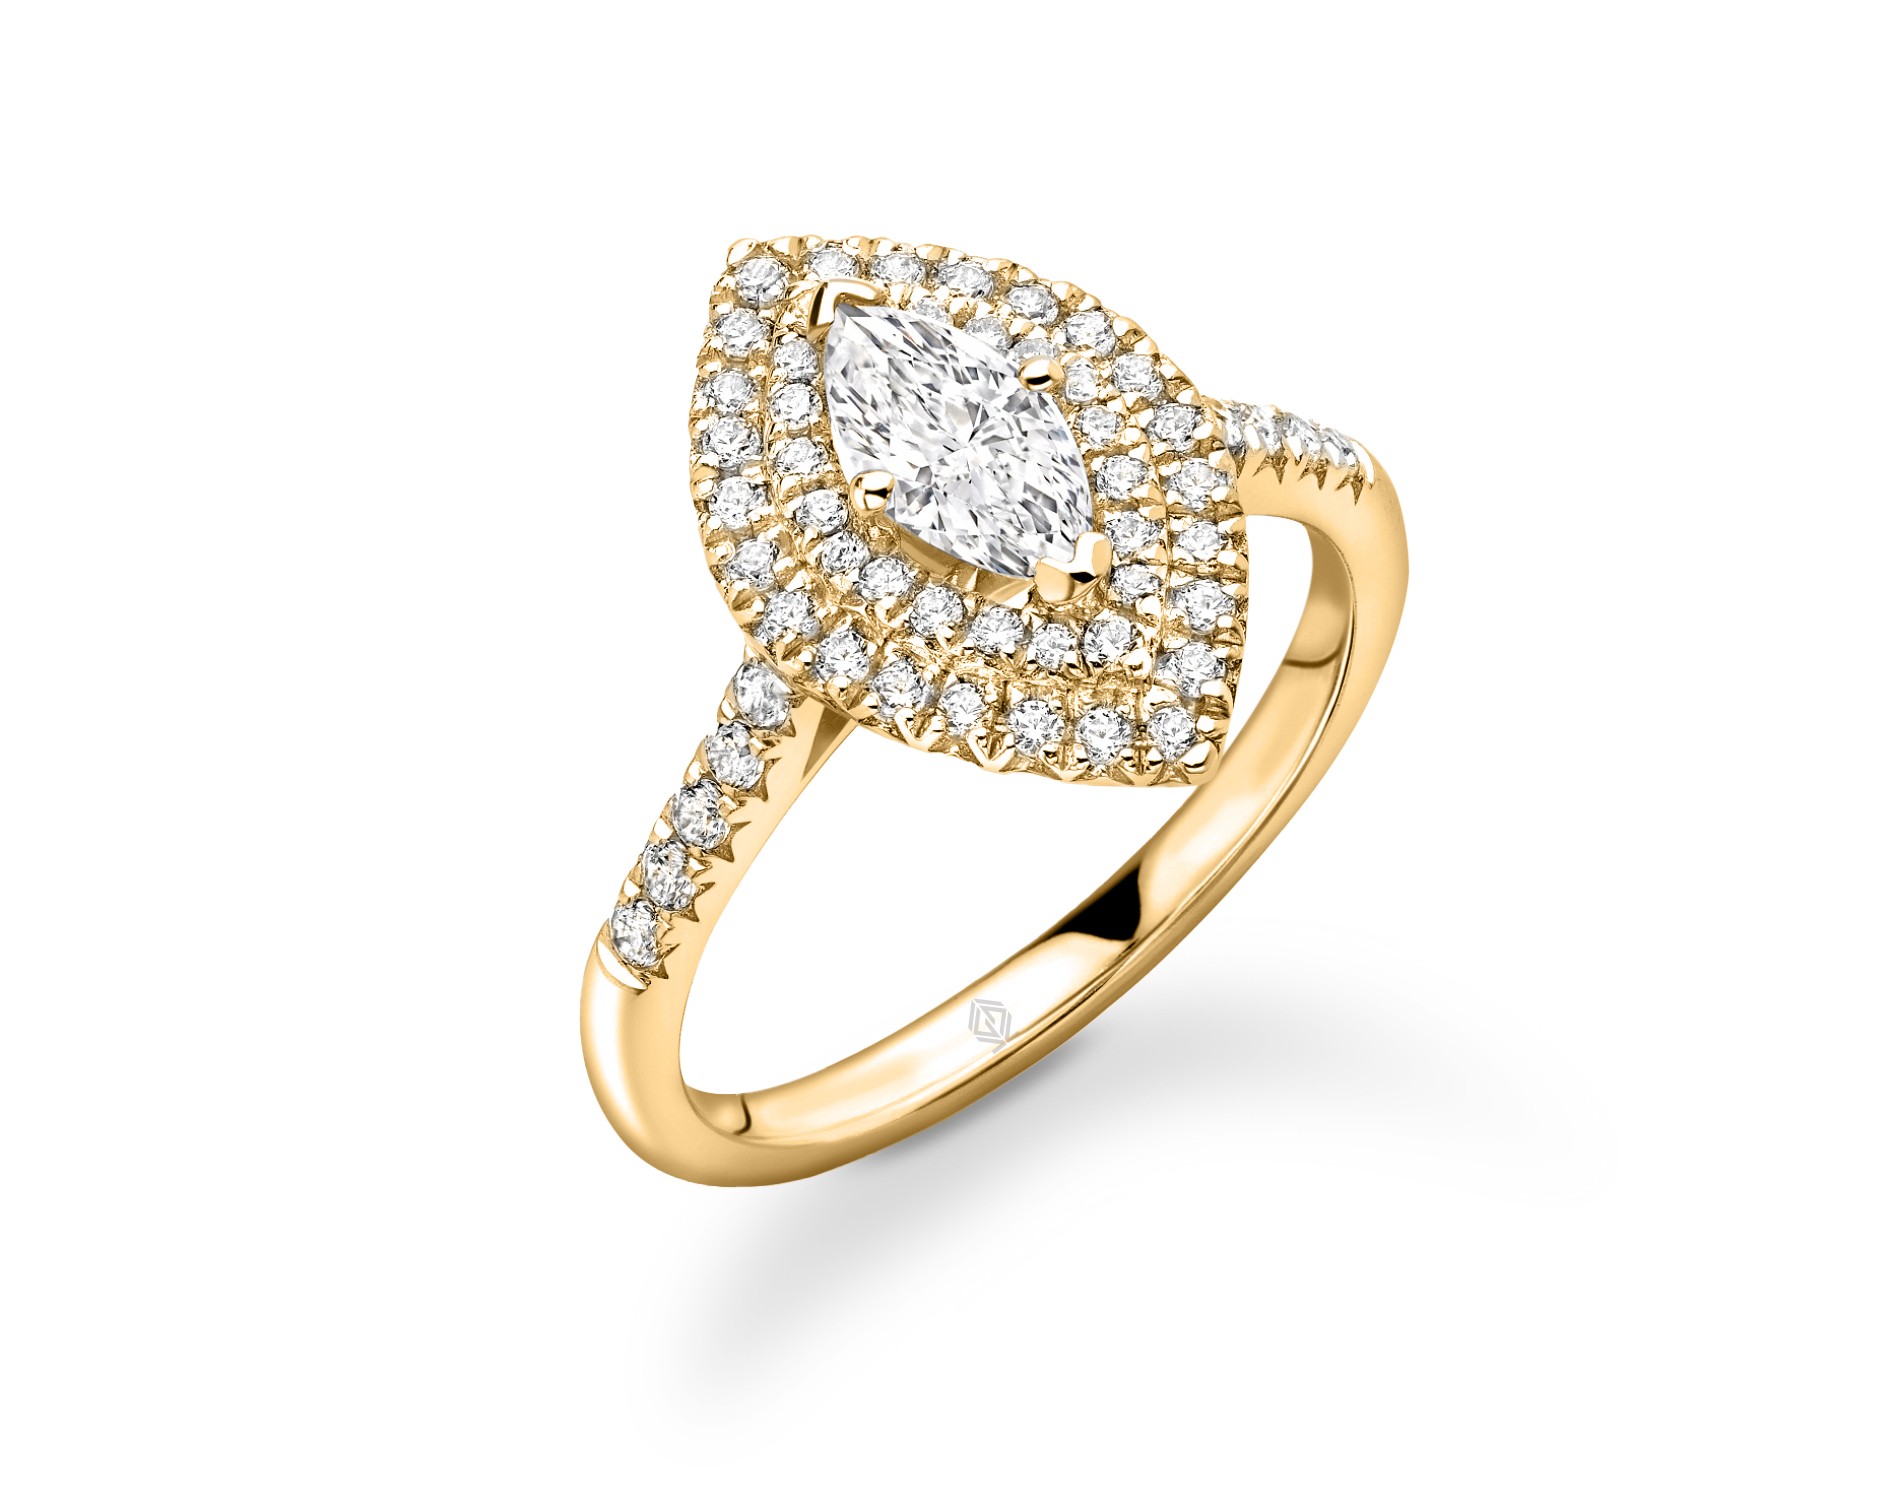 18K YELLOW GOLD DOUBLE HALO MARQUISE CUT DIAMOND ENGAGEMENT RING WITH SIDE STONES PAVE SET